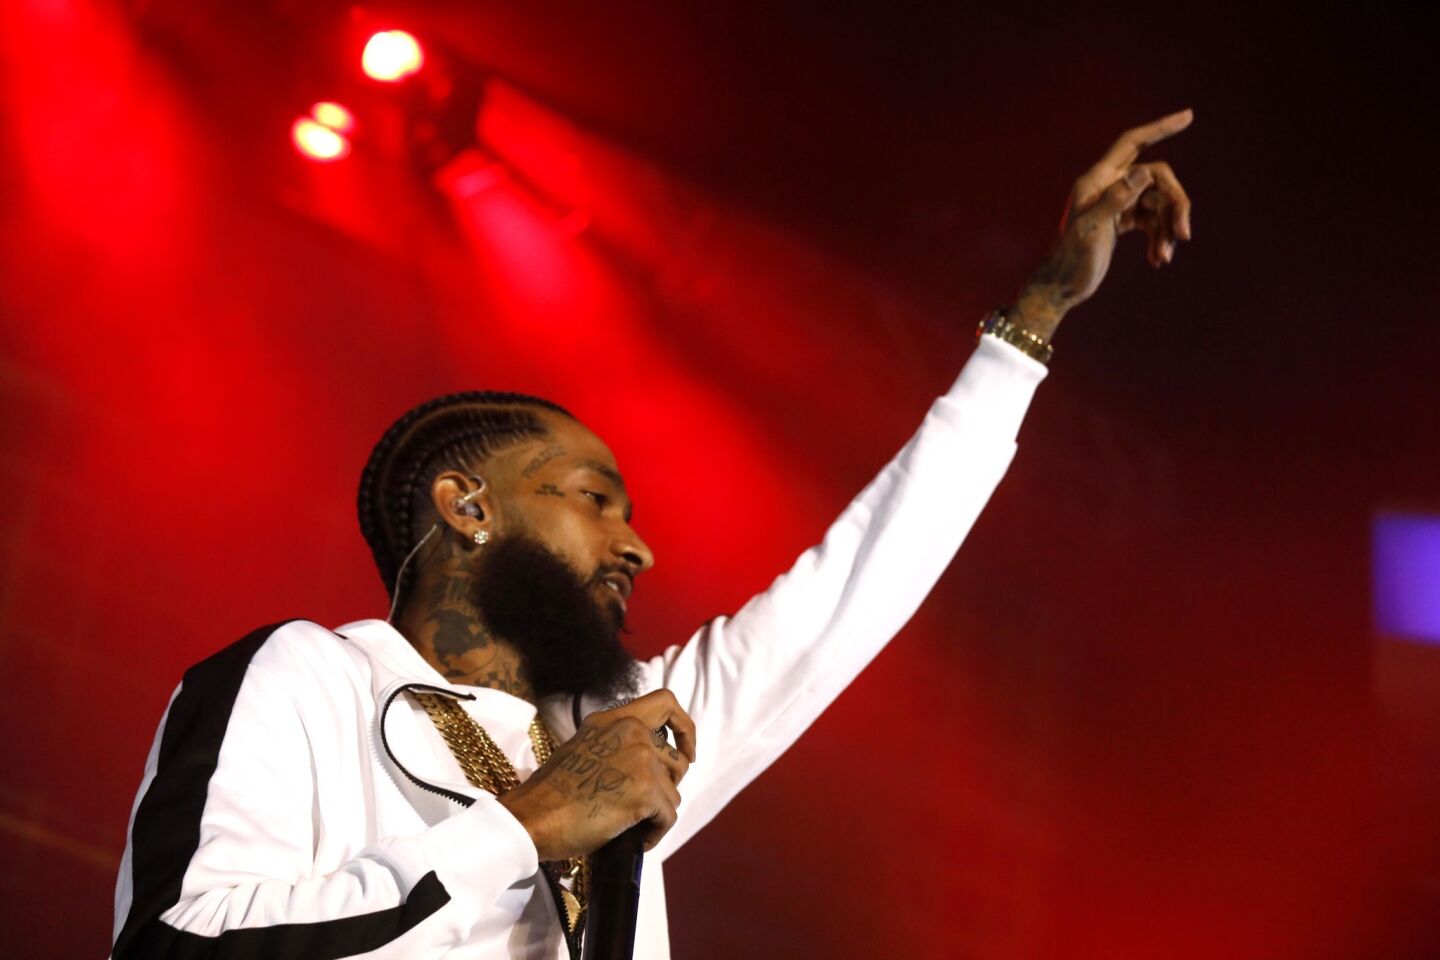 Nipsey Hussle performs at the Hollywood Palladium. He was nominated for a Grammy for his album "Victory Lap."